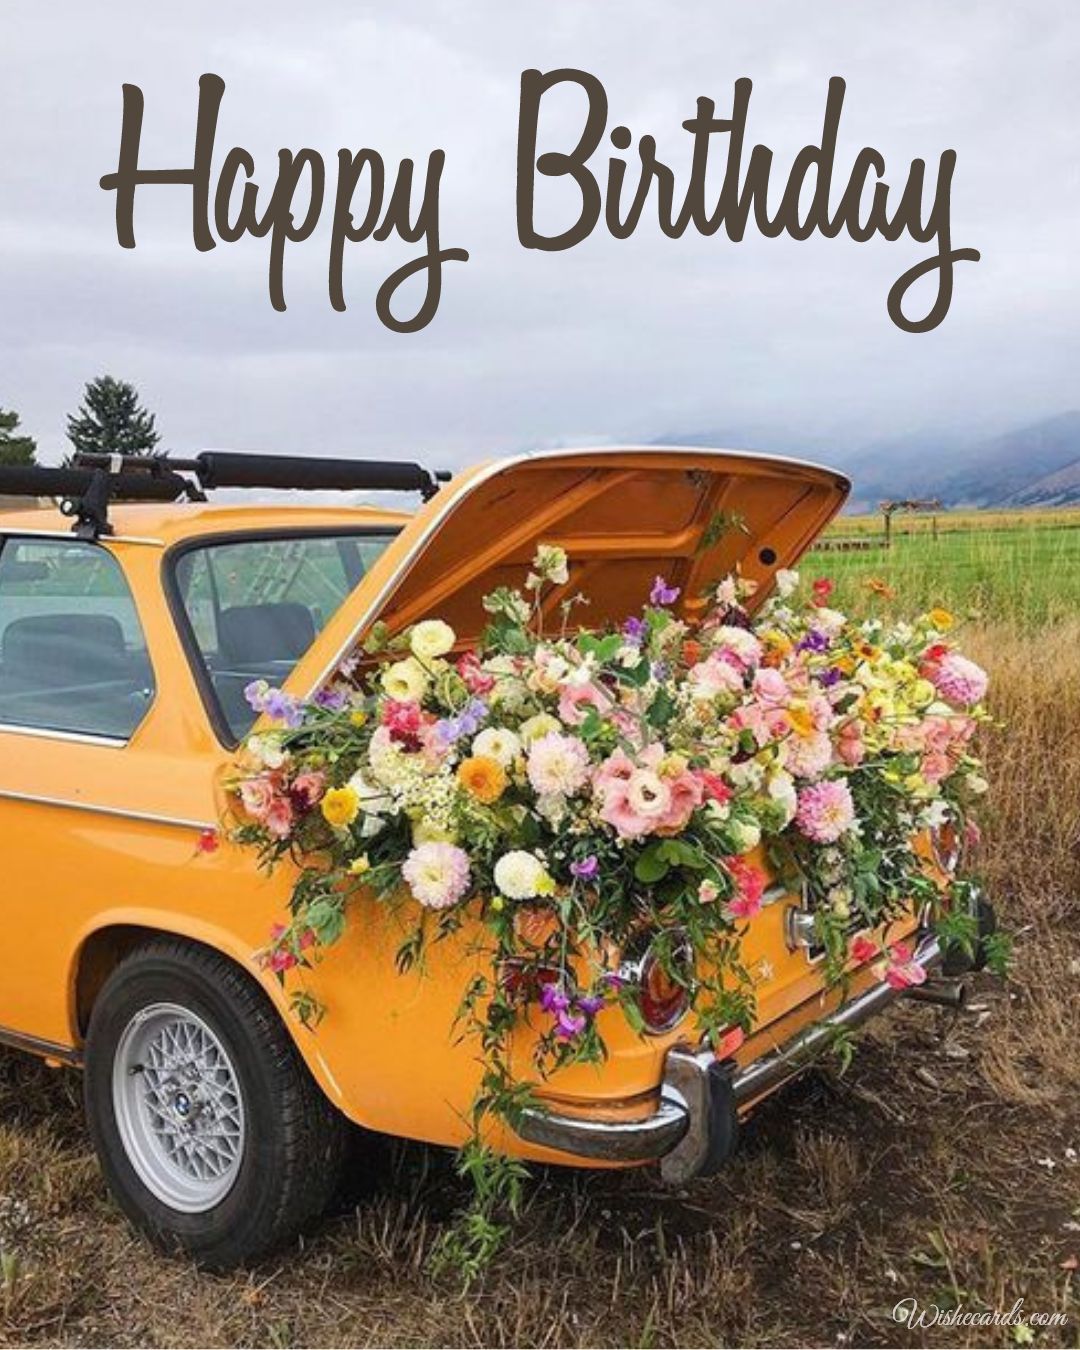 Birthday Card with Cars on Them